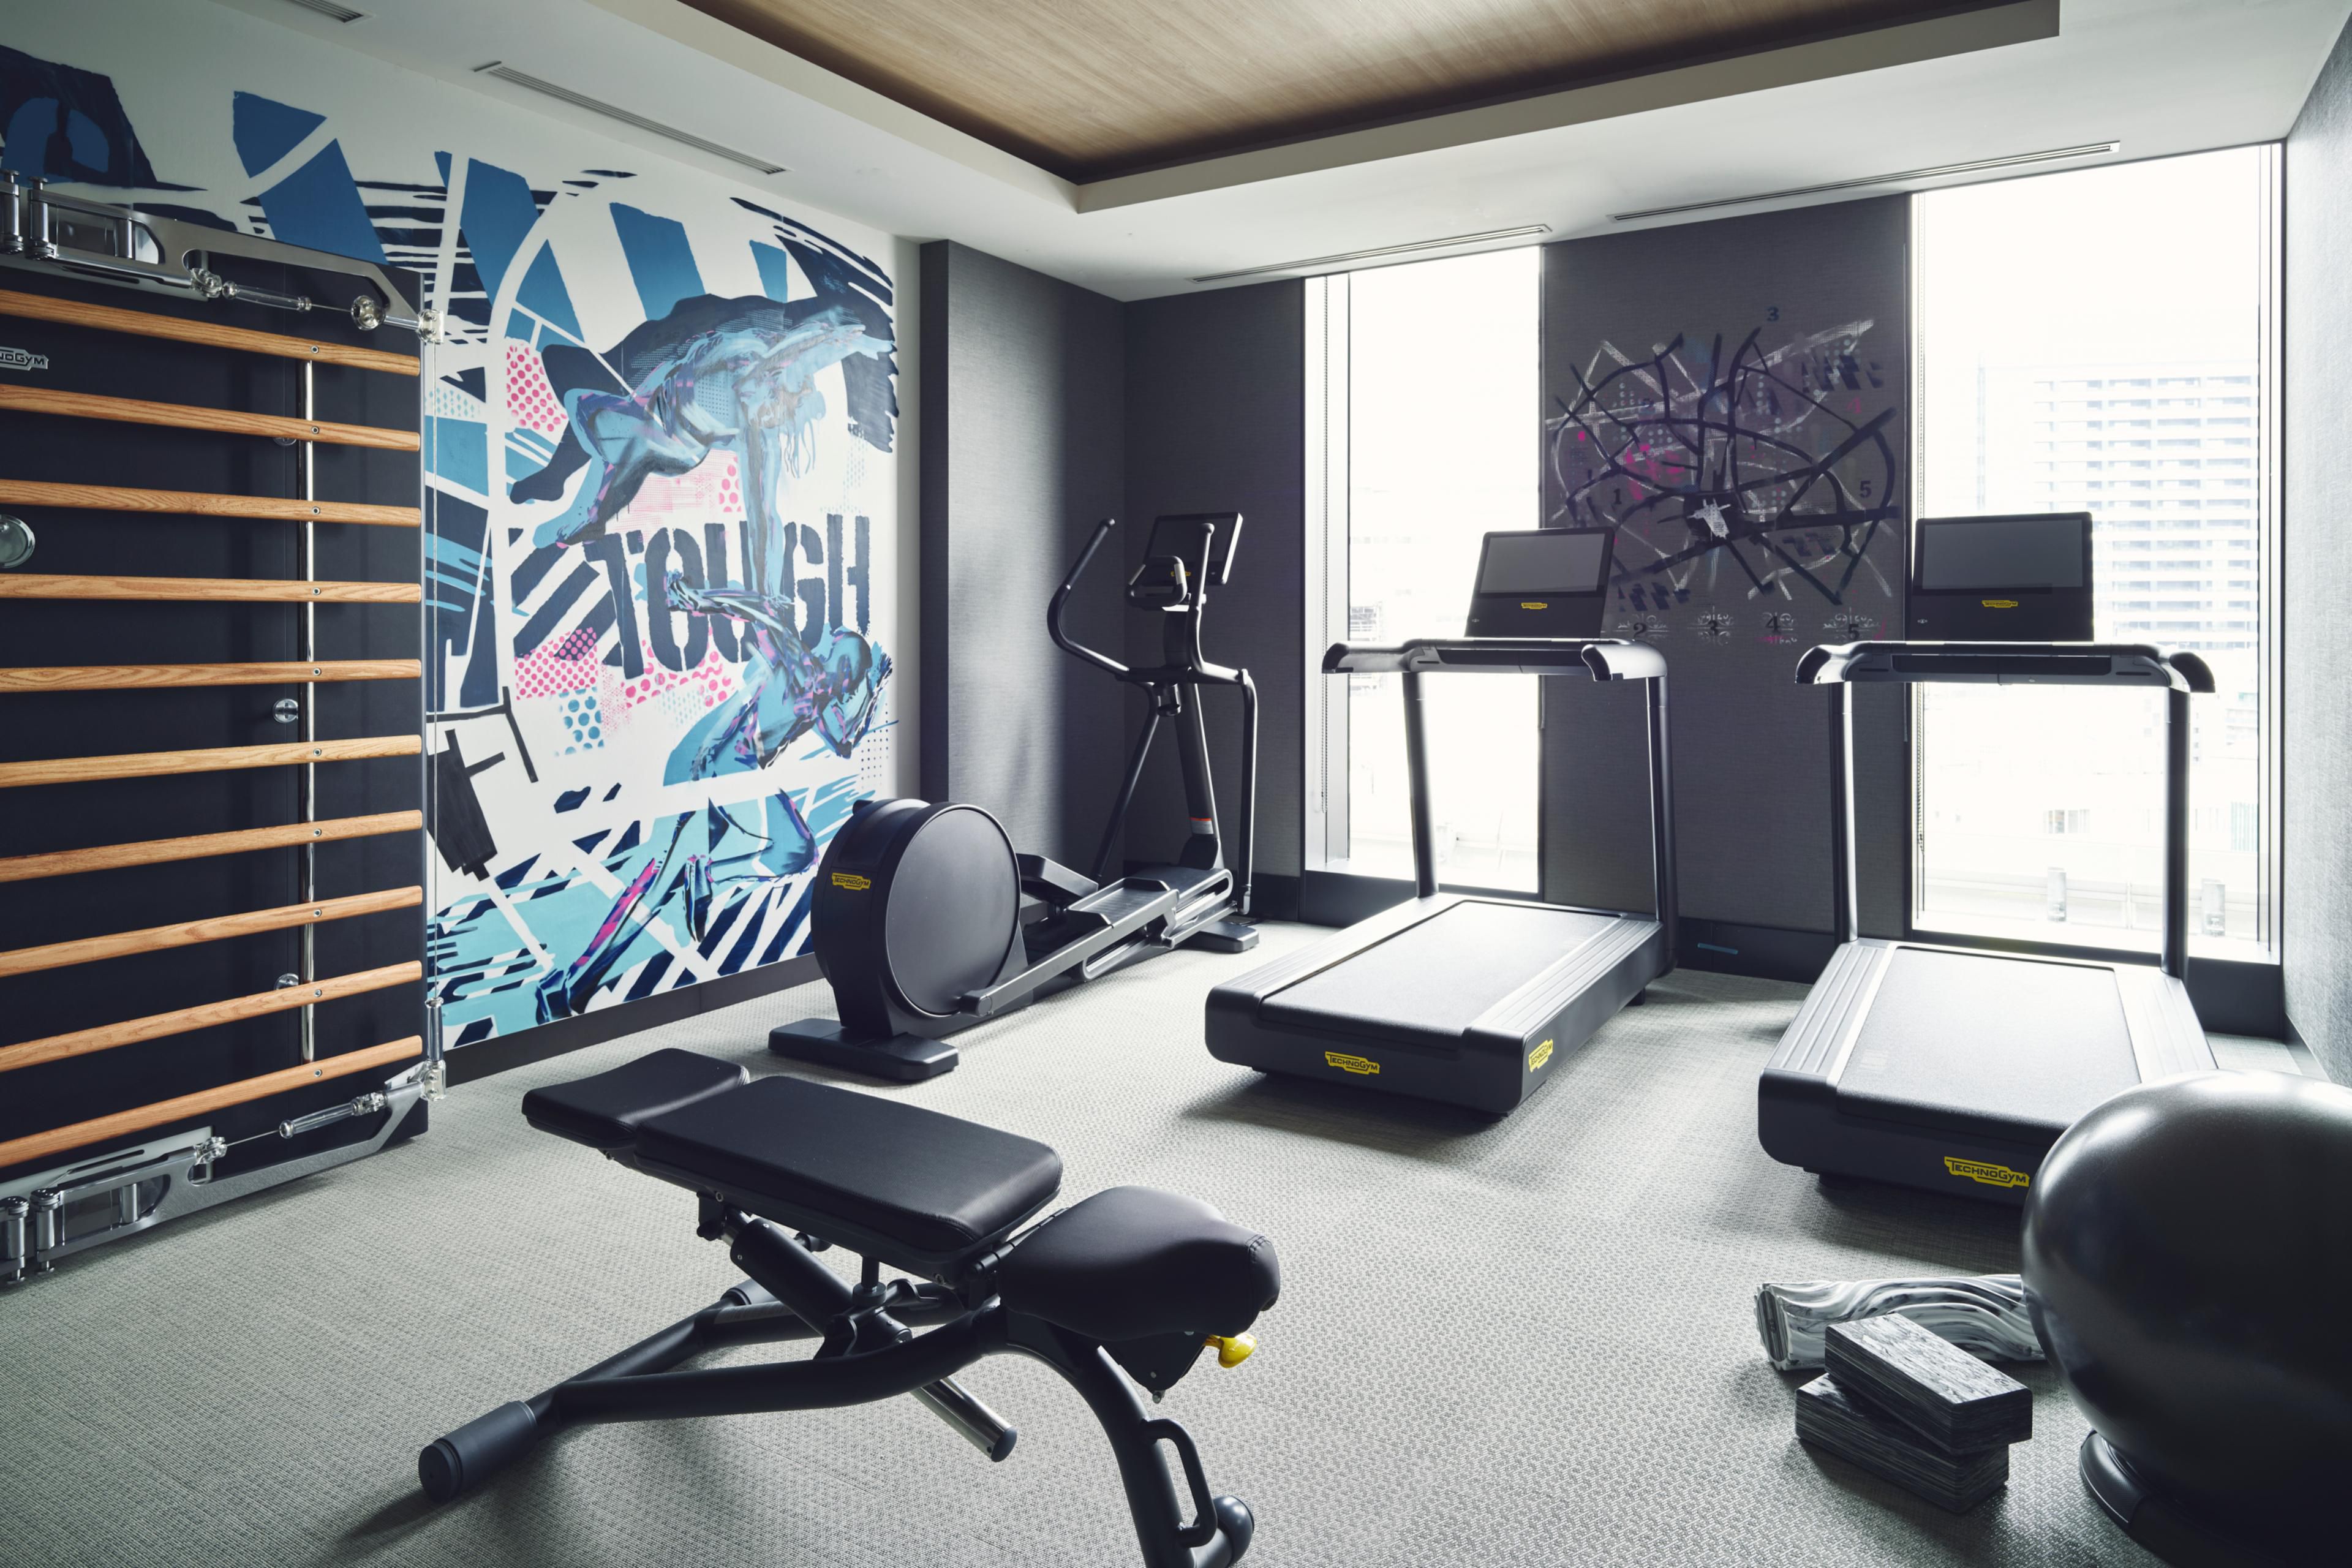 We offer the latest fitness machines and enjoy your own lifestyle during your stay.
The machines are equipped with Technogym equipment, which is used by top athletes and celebrities around the world for its sophisticated design and high technology. The wall artwork, which is designed to help you enjoy your workout will lead you to energetic space.